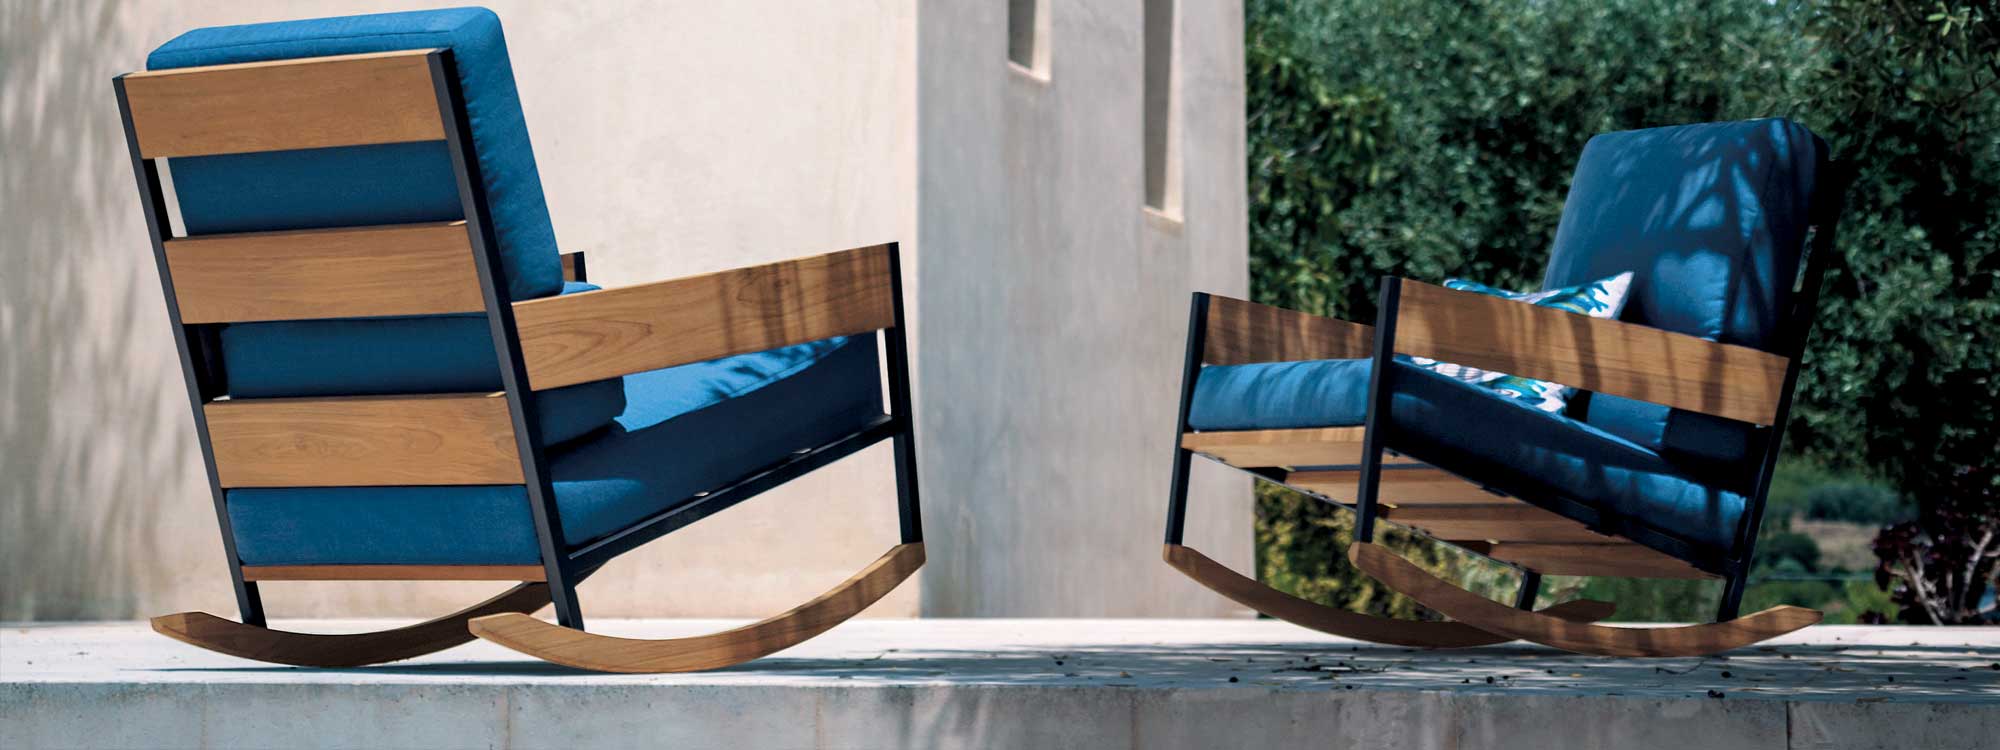 Pair of Nap modern outdoor rocking chairs on poured concrete terrace